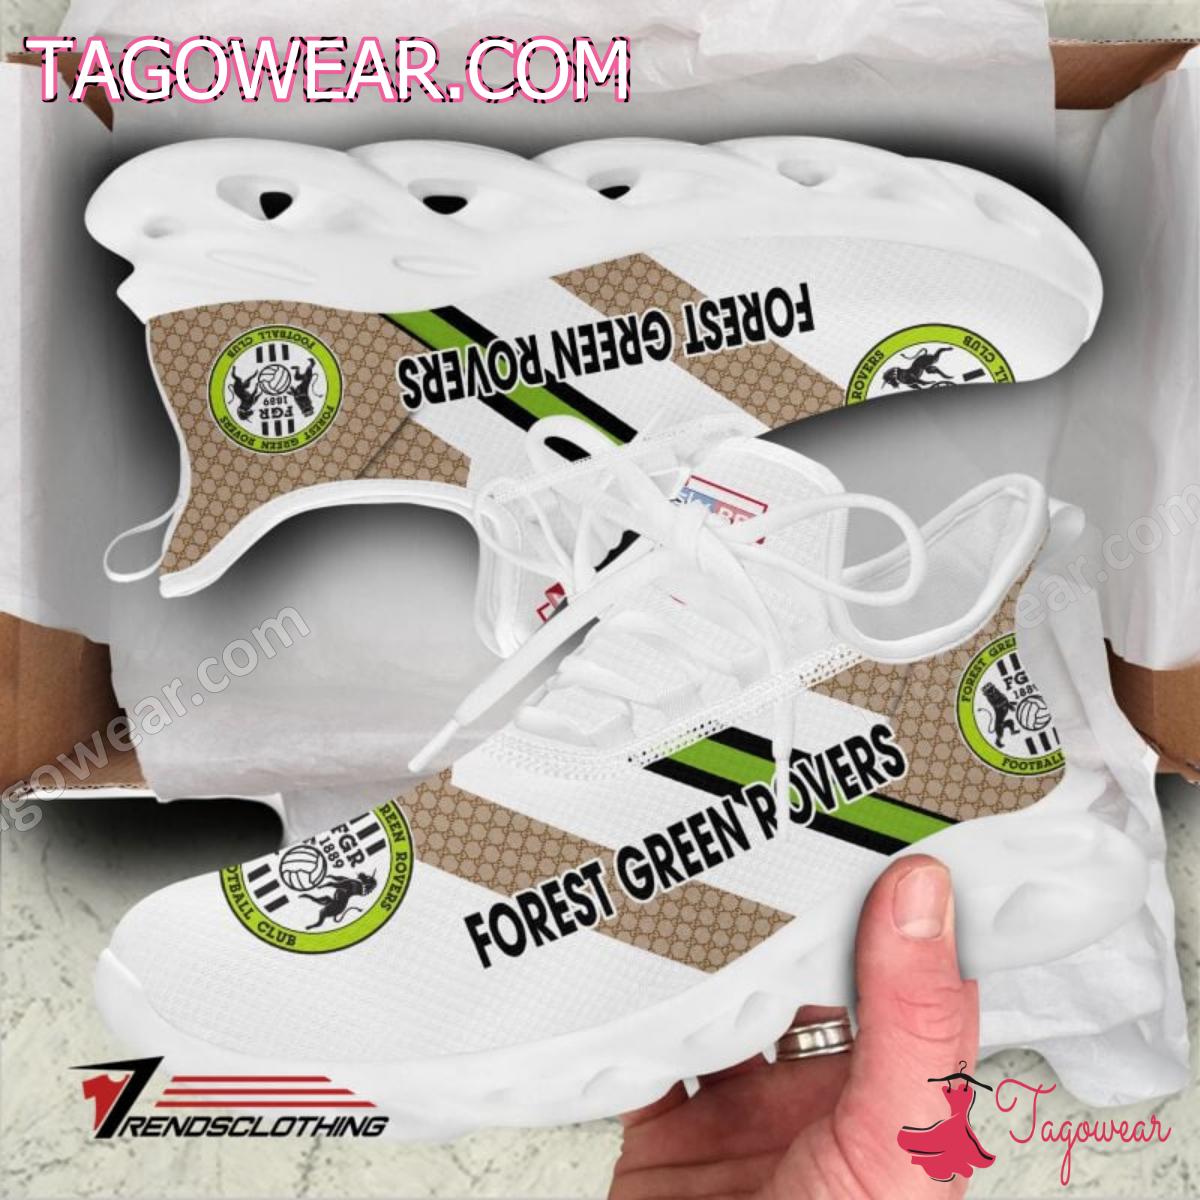 Forest Green Rovers EFL Gucci Max Soul Shoes